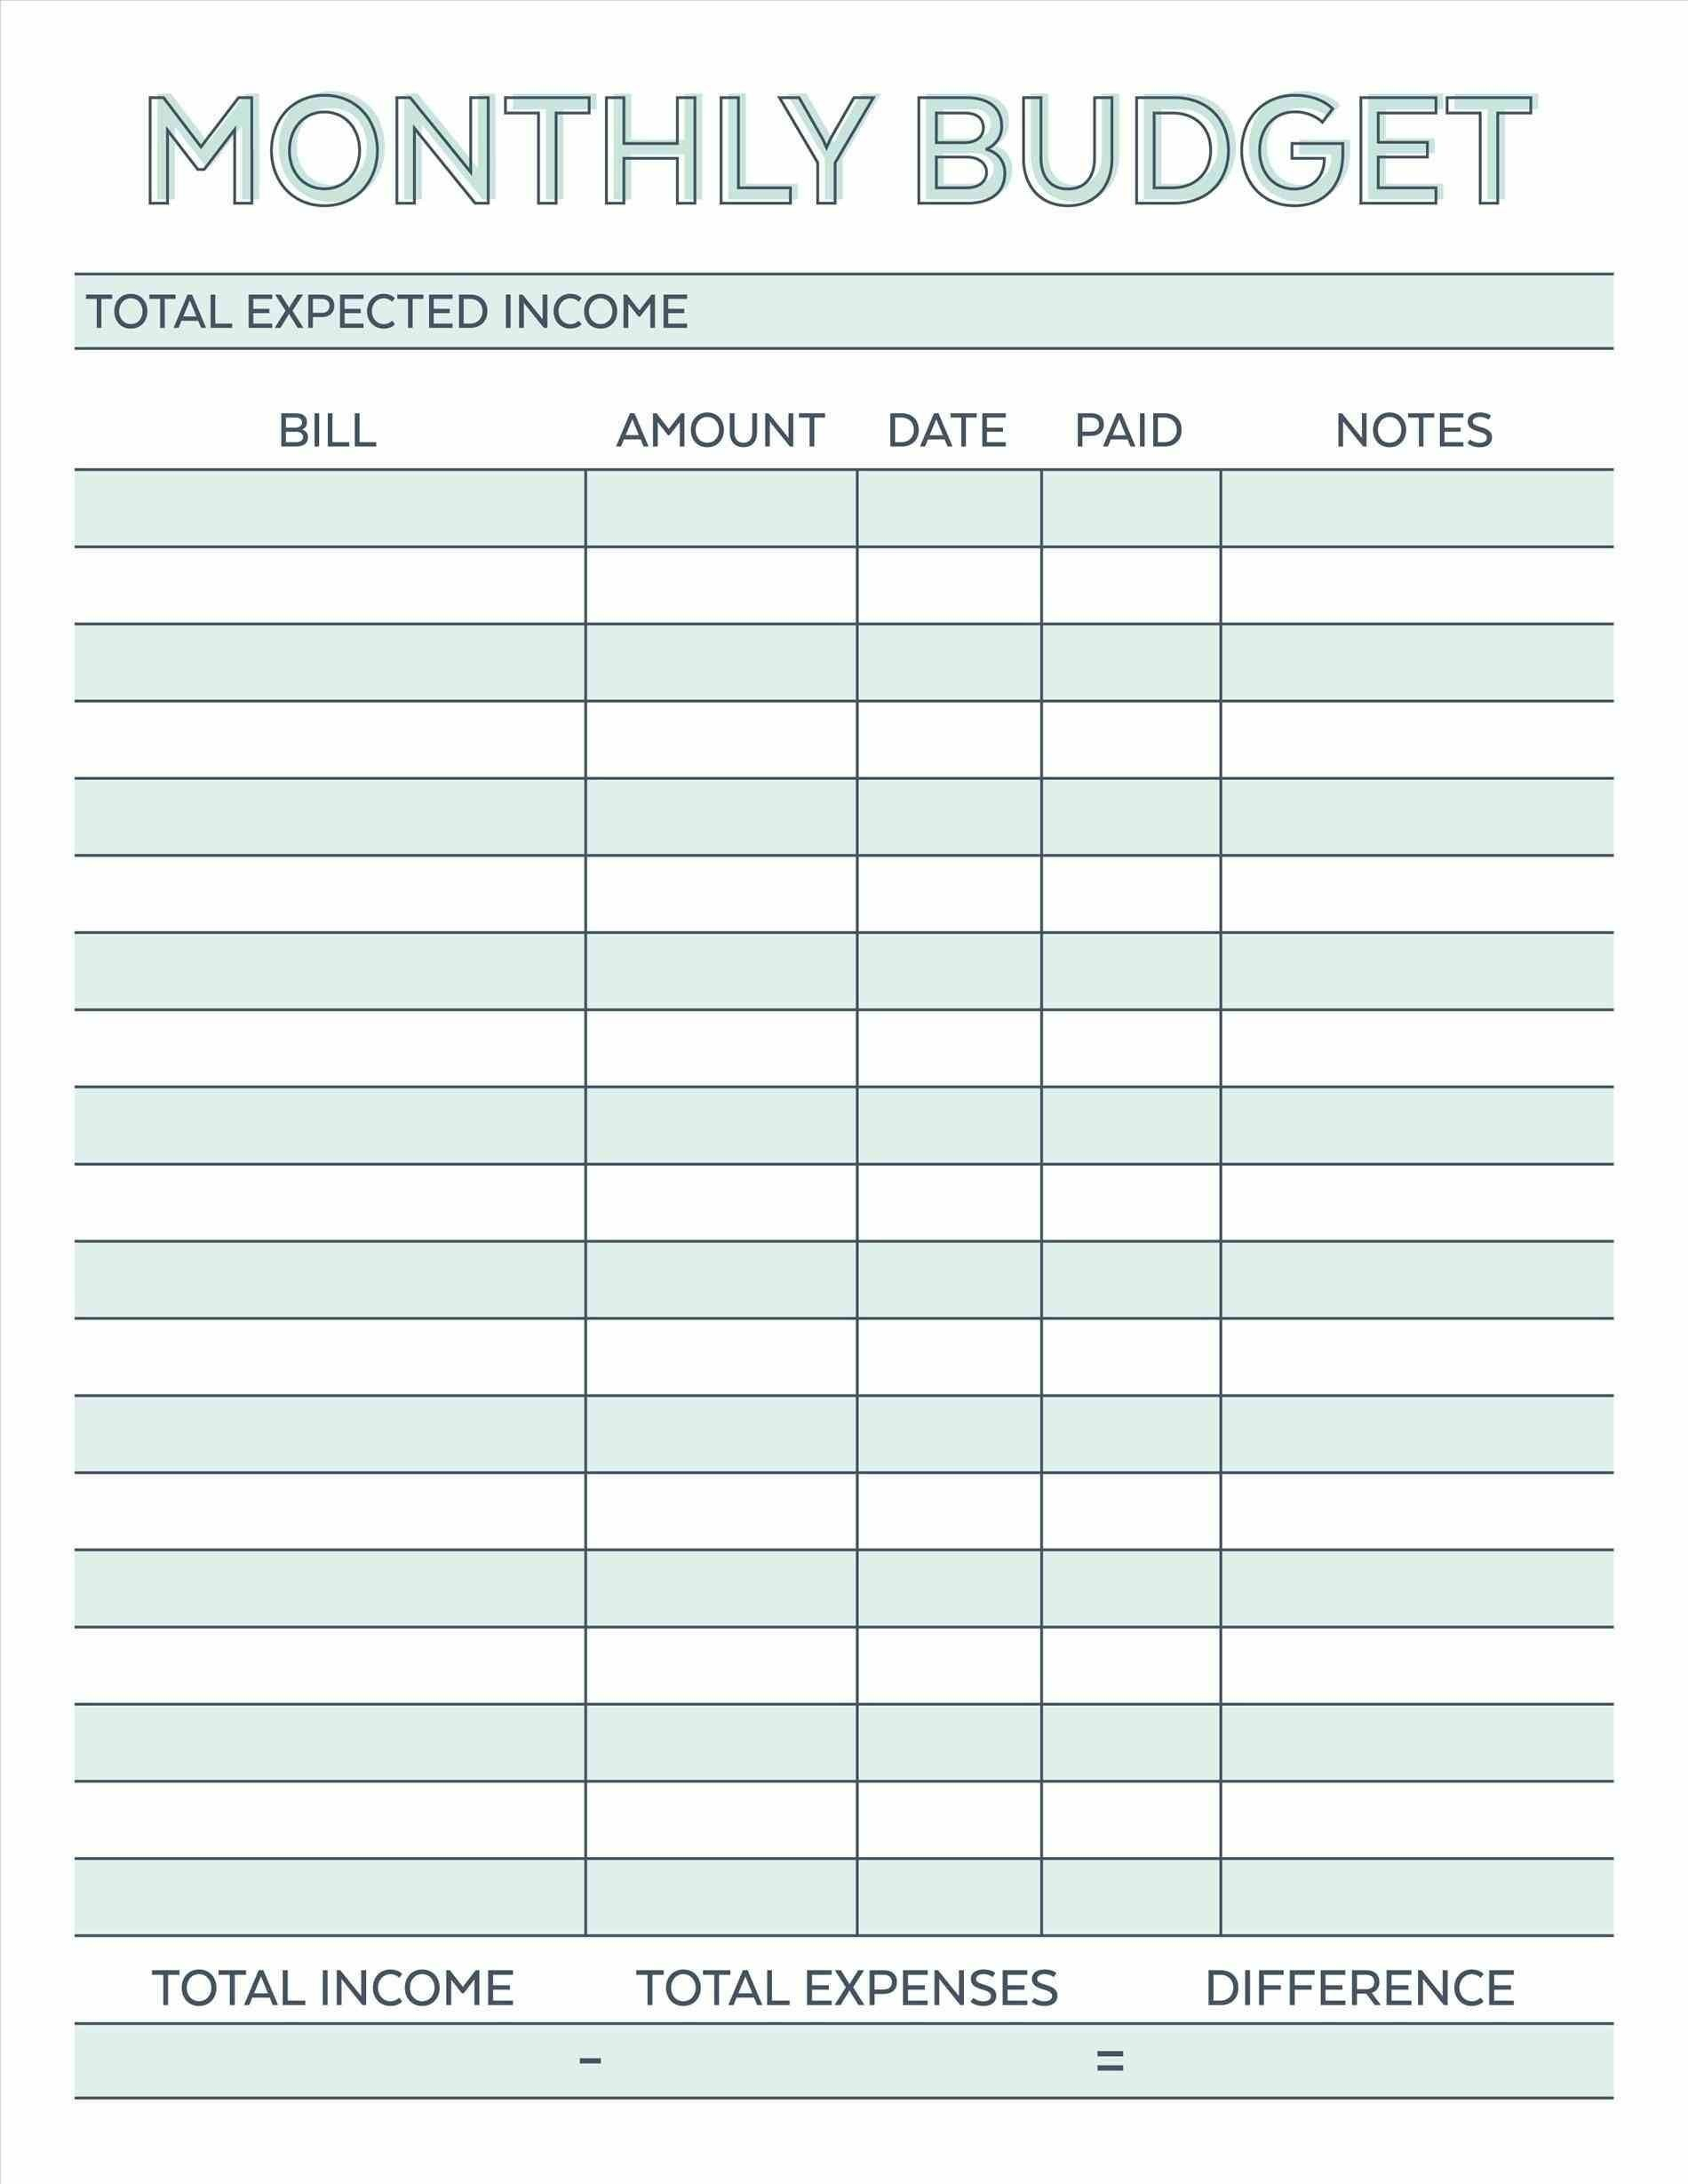 Weekly Paycheck Budget Spreadsheet within Weekly Paycheck Budget